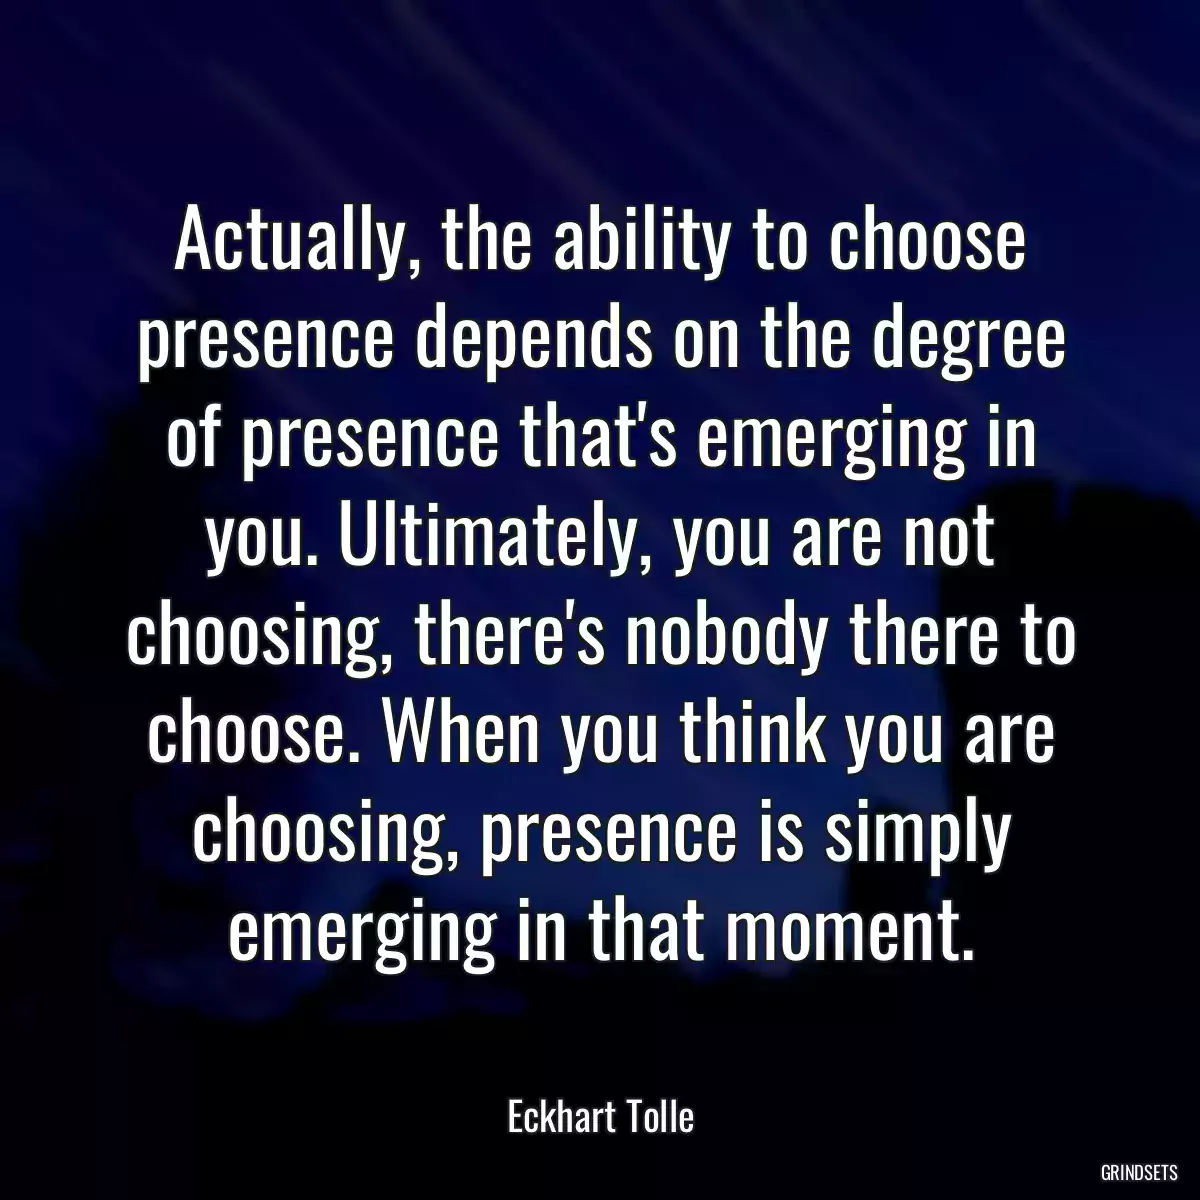 Actually, the ability to choose presence depends on the degree of presence that\'s emerging in you. Ultimately, you are not choosing, there\'s nobody there to choose. When you think you are choosing, presence is simply emerging in that moment.